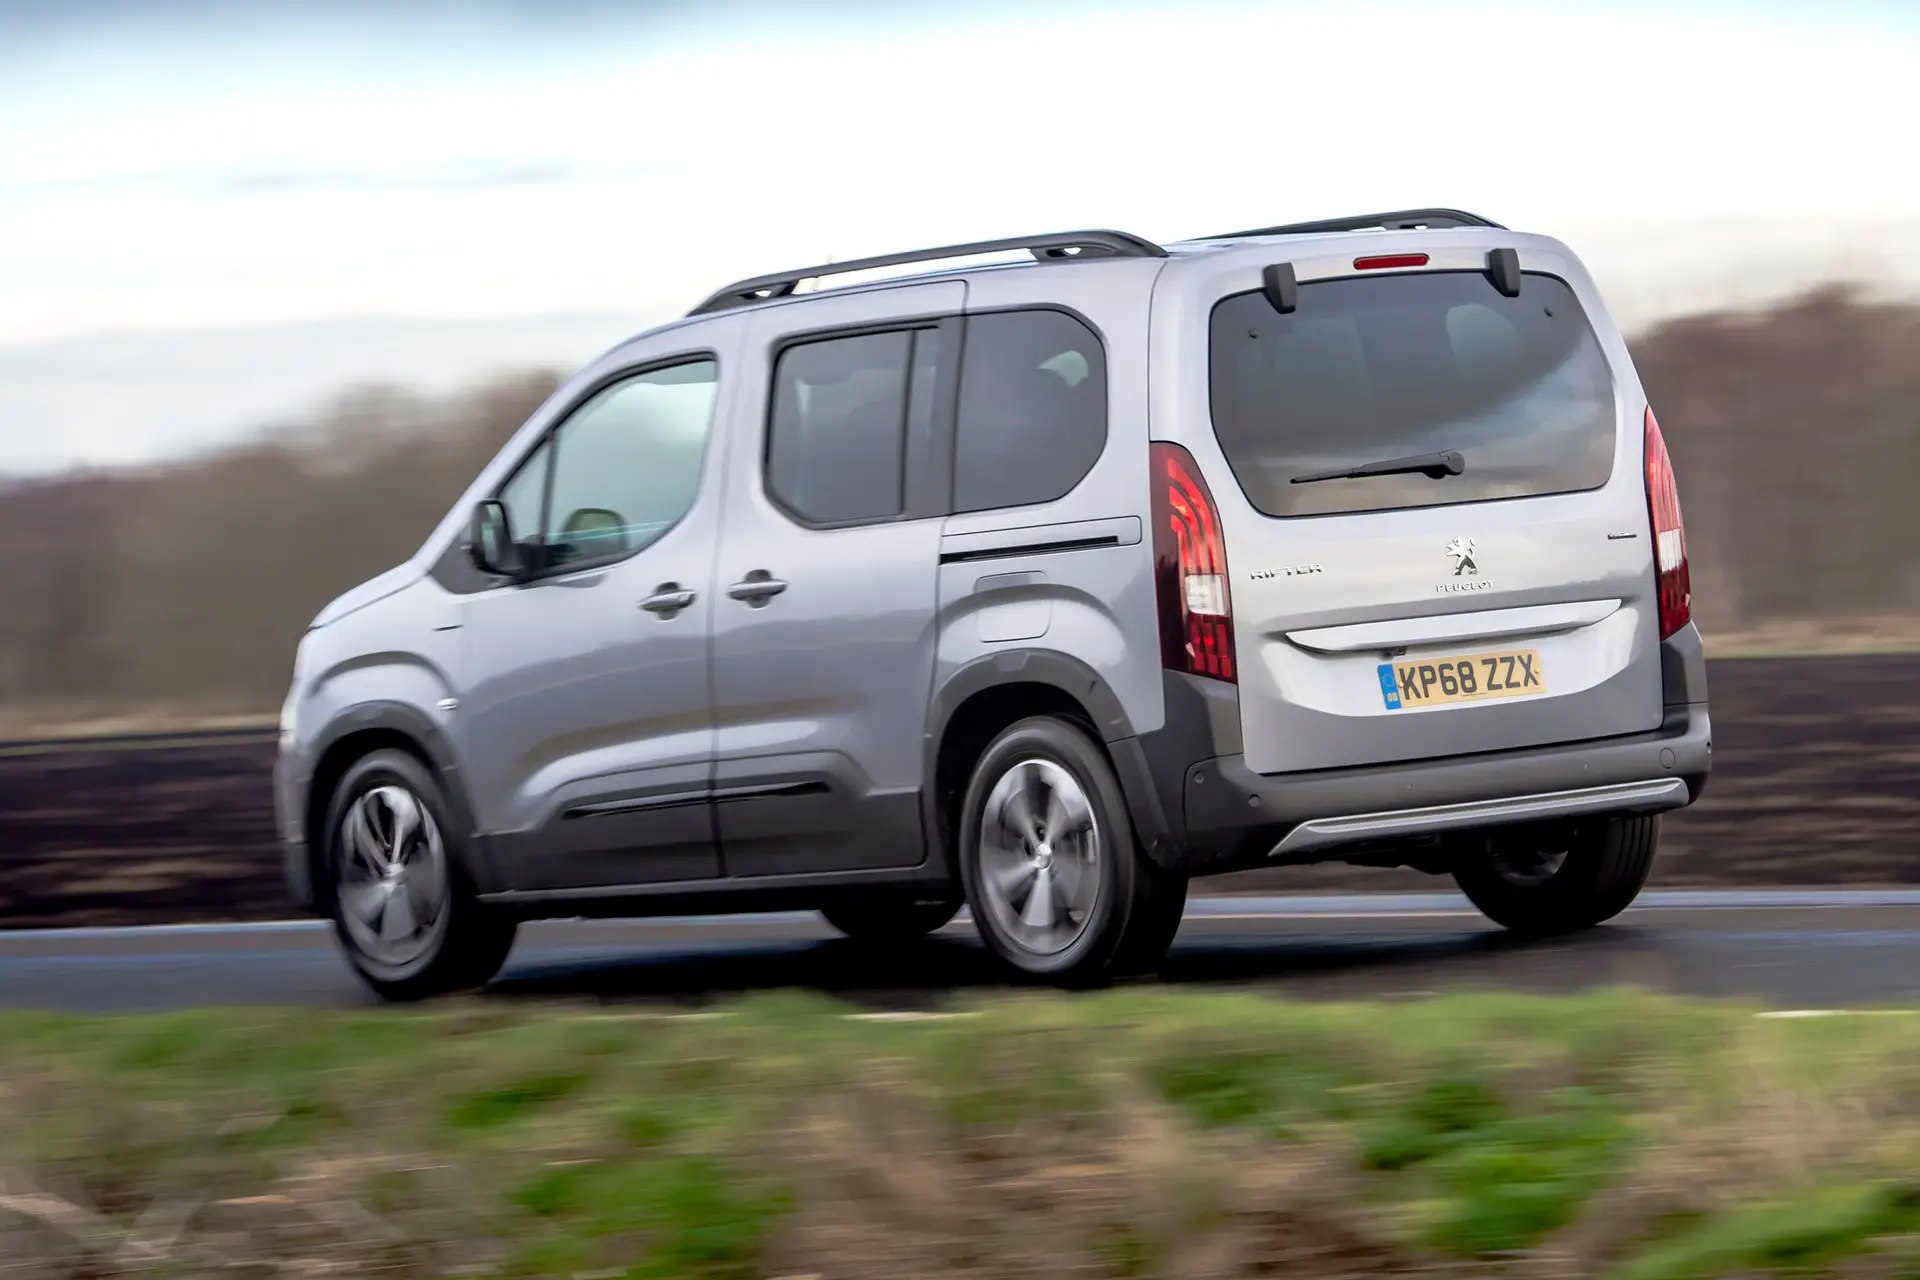 Peugeot Rifter review: silly name, looks awful but hard not to love